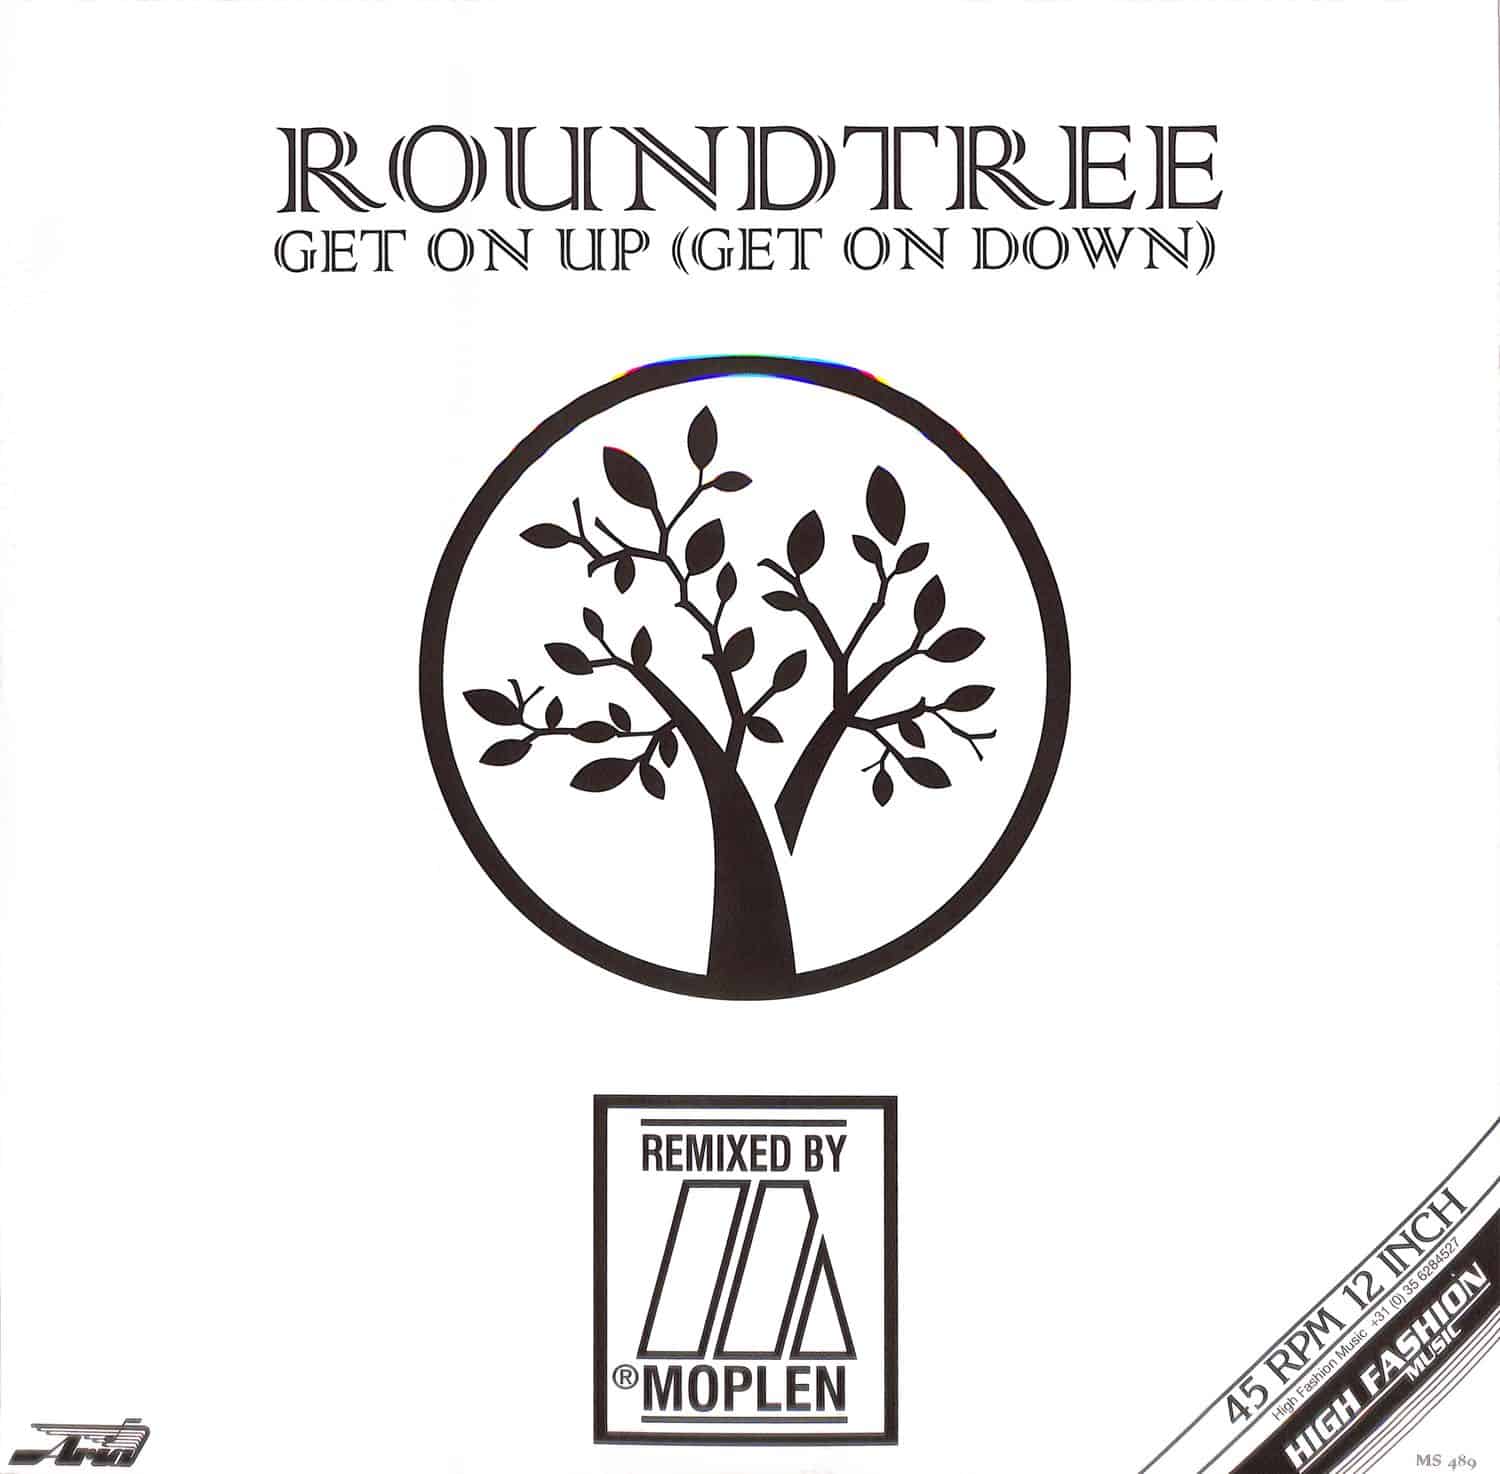 Roundtree - GET ON UP 